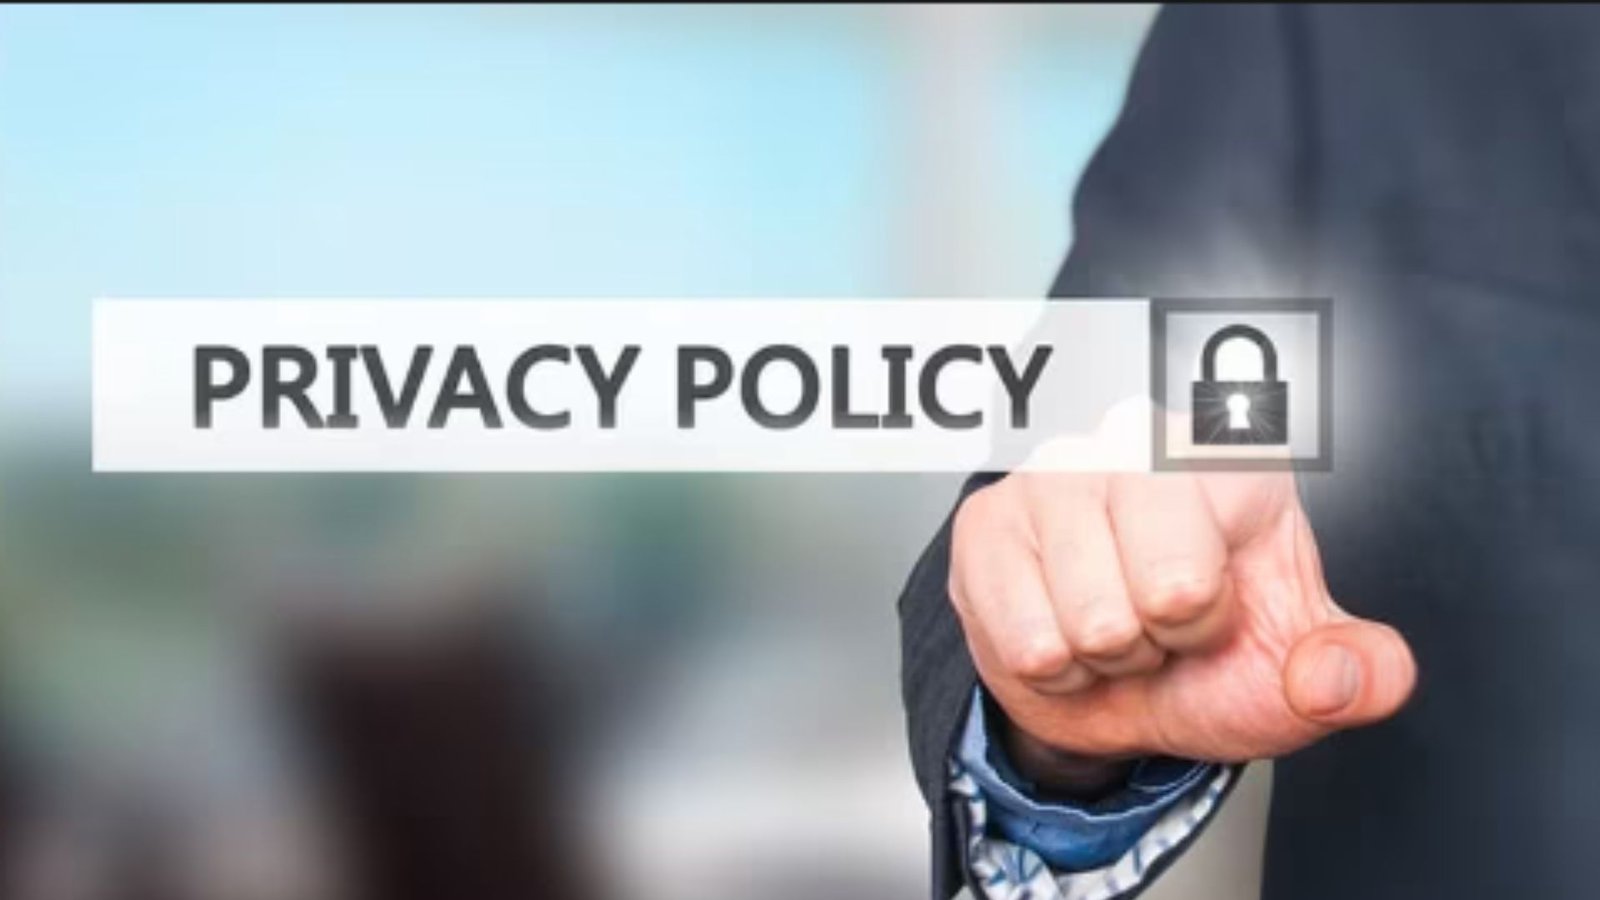 A privacy policy picture.